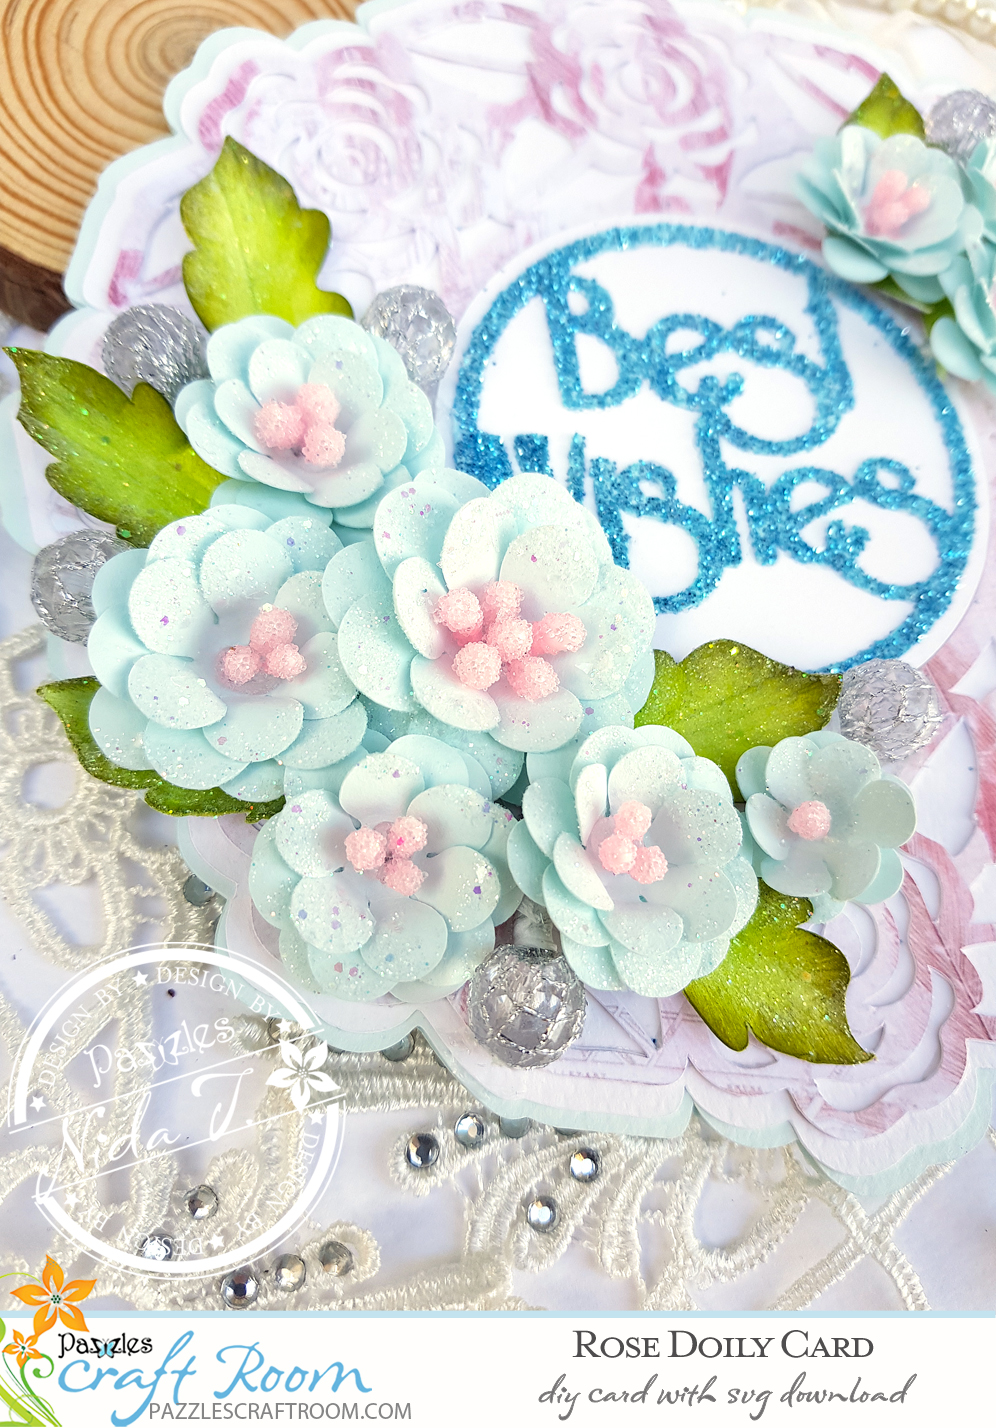 Pazzles DIY Rose Doily Card with instant SVG download. Compatible with all major electronic cutters including Pazzles Inspiration, Cricut, and Silhouette Cameo. Design by Nida Tanweer.